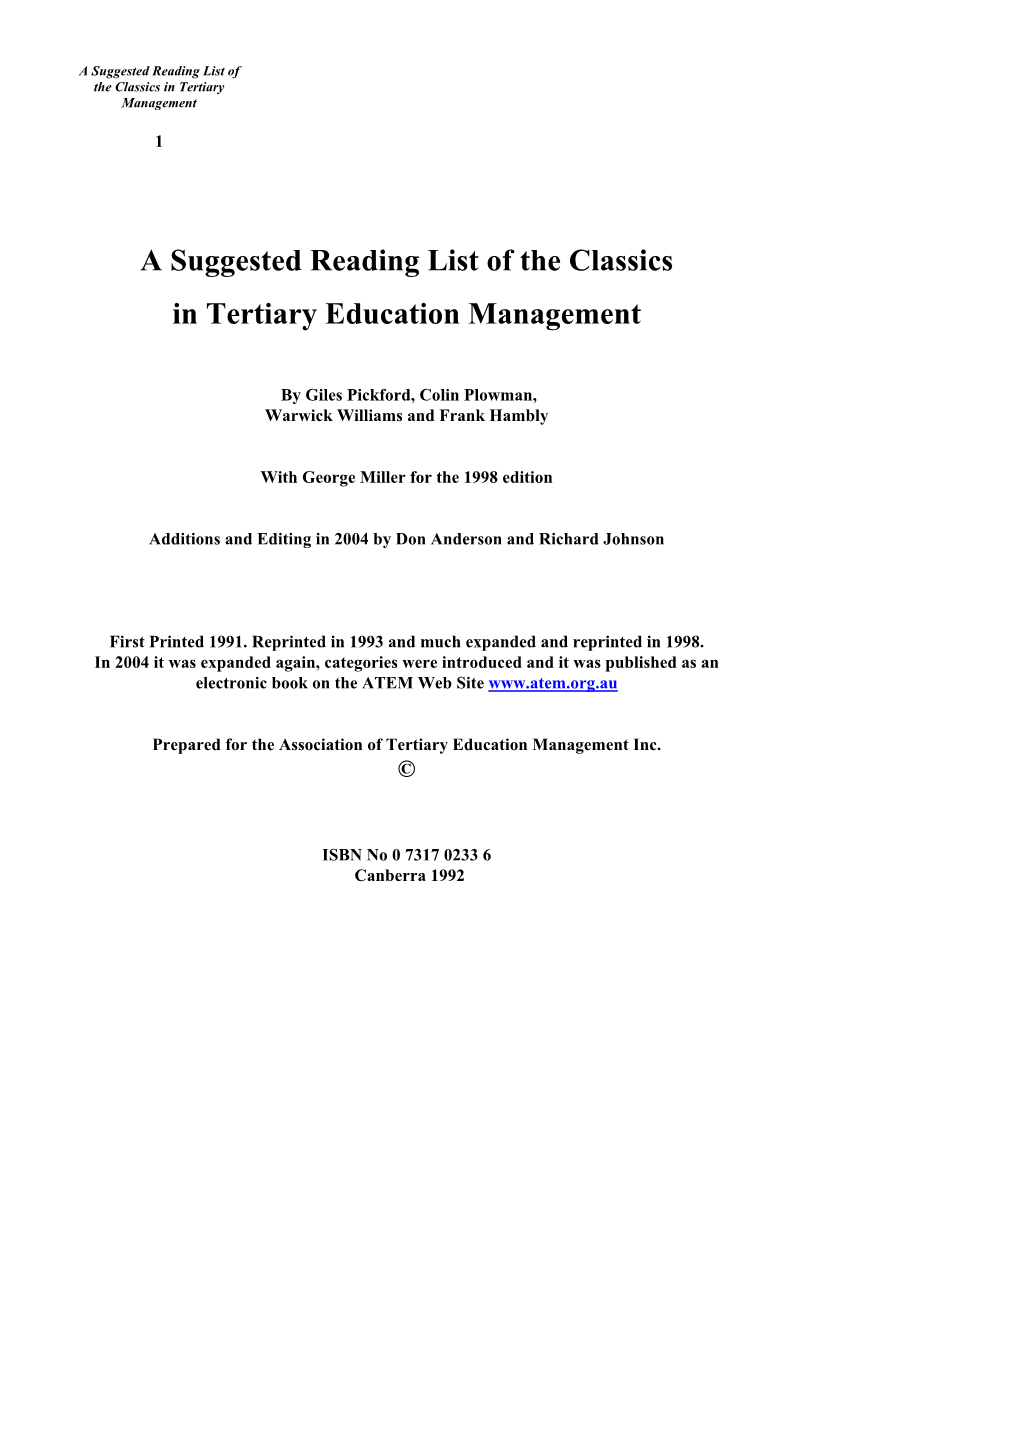 A Suggested Reading List of the Classics in Tertiary Education Management